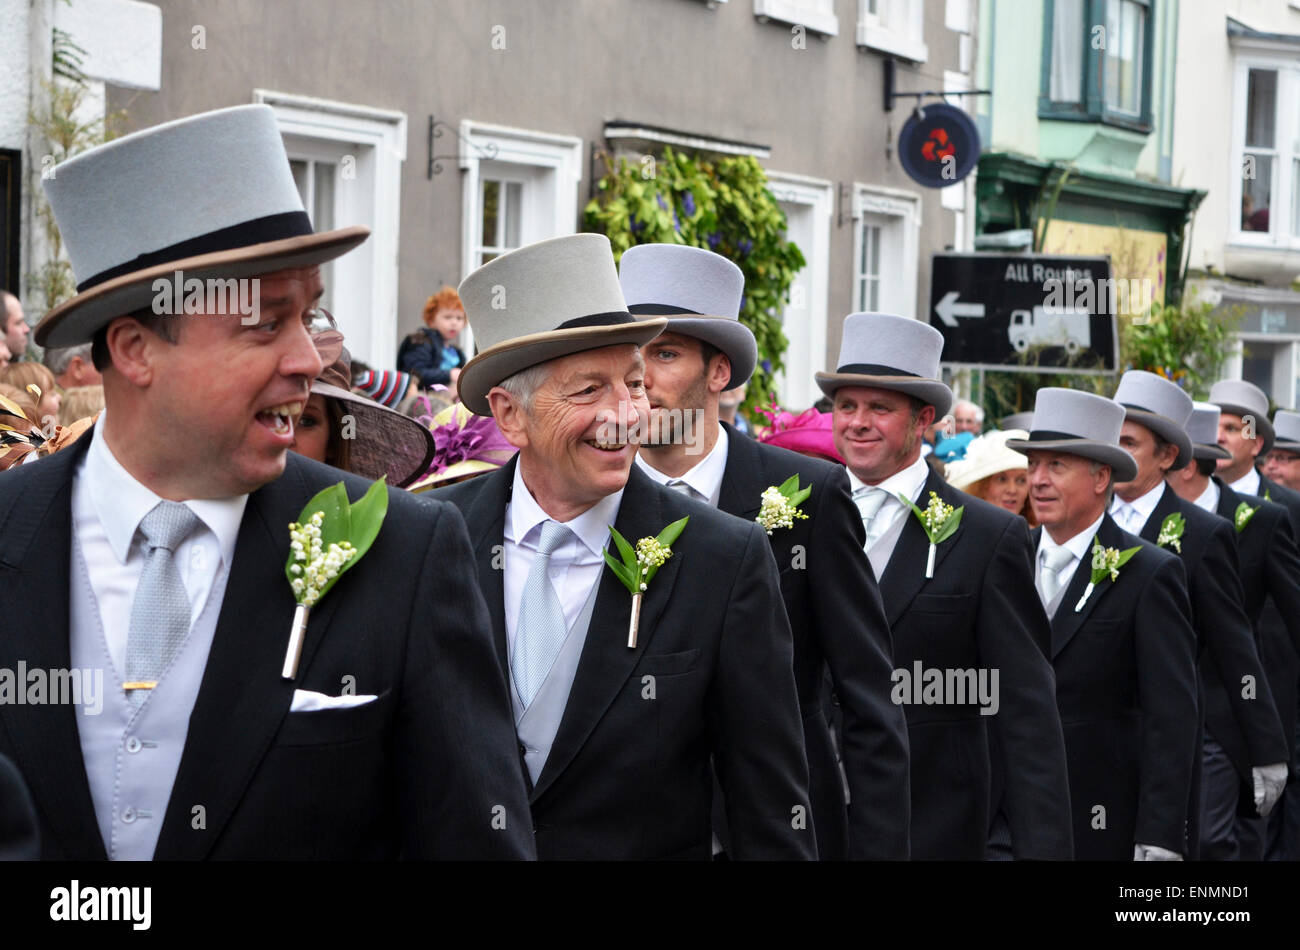 Helston, Cornwall, UK. 8th May 2015. Participants in the Midday Dance during the Annual Flora Day celebrations to signal the end of Winter it is one of the countrys oldest festivals.Kevin Britland/Alamy Live News Stock Photo